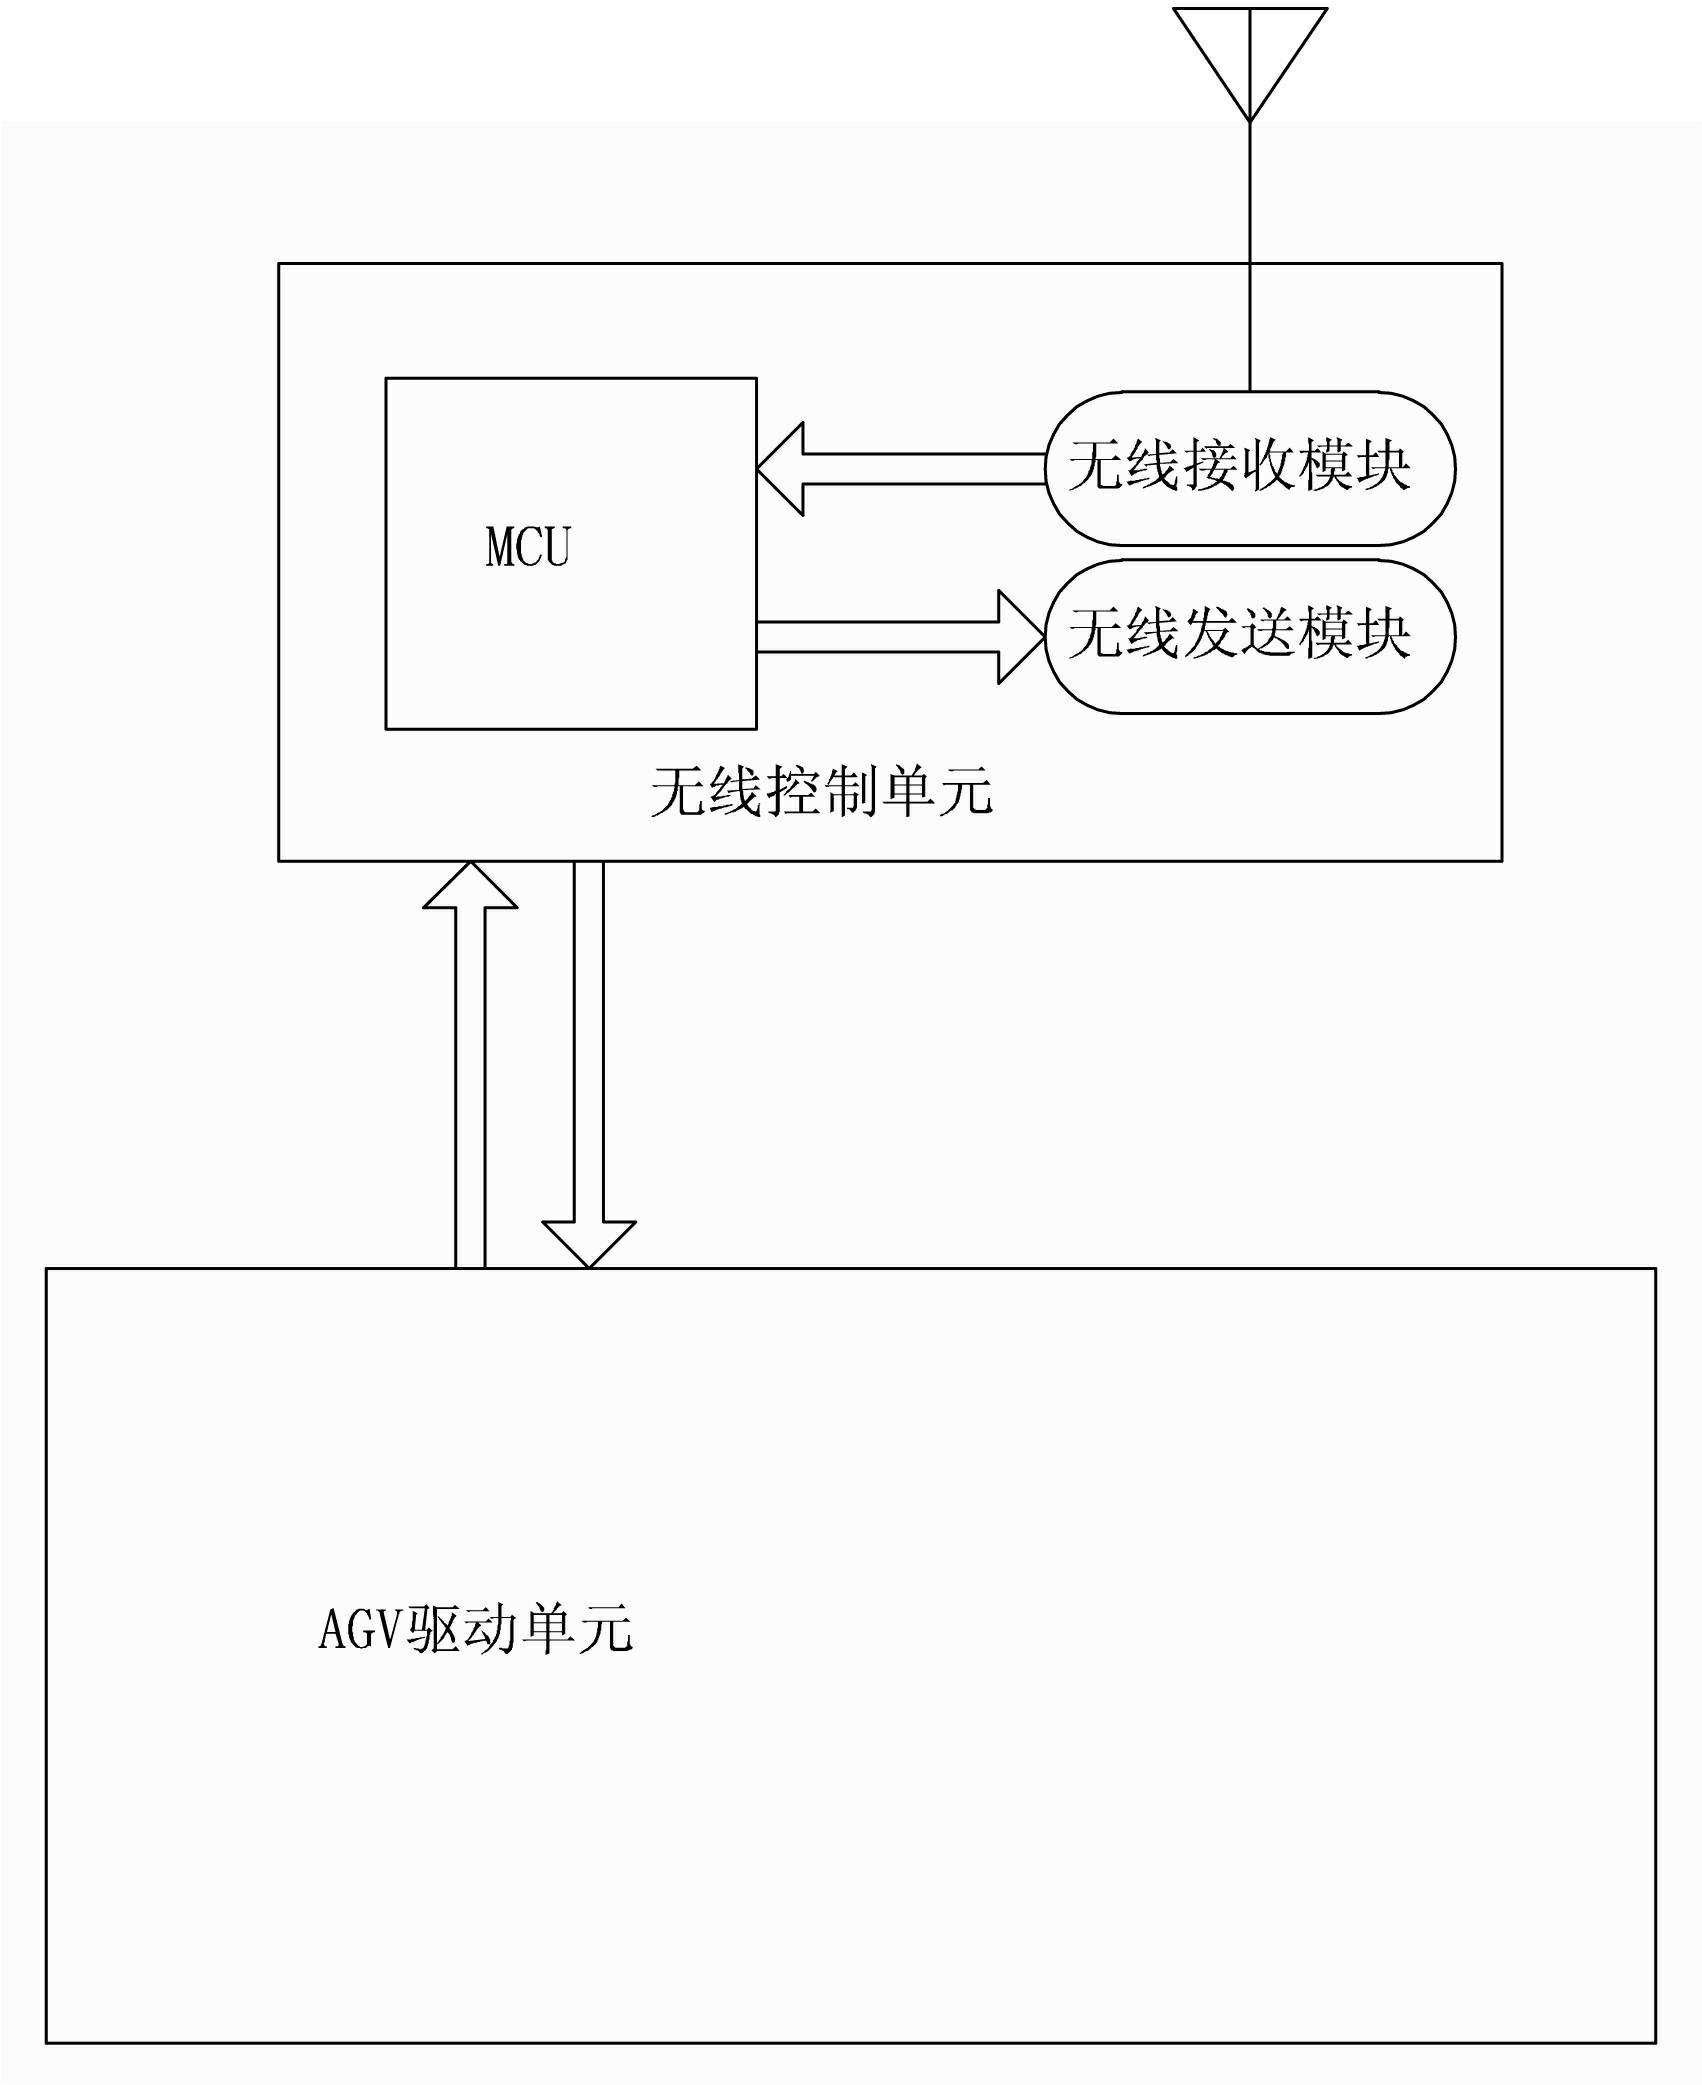 AGV (automatic guided vehicle) traffic automatic control system and AGV traffic automatic control method